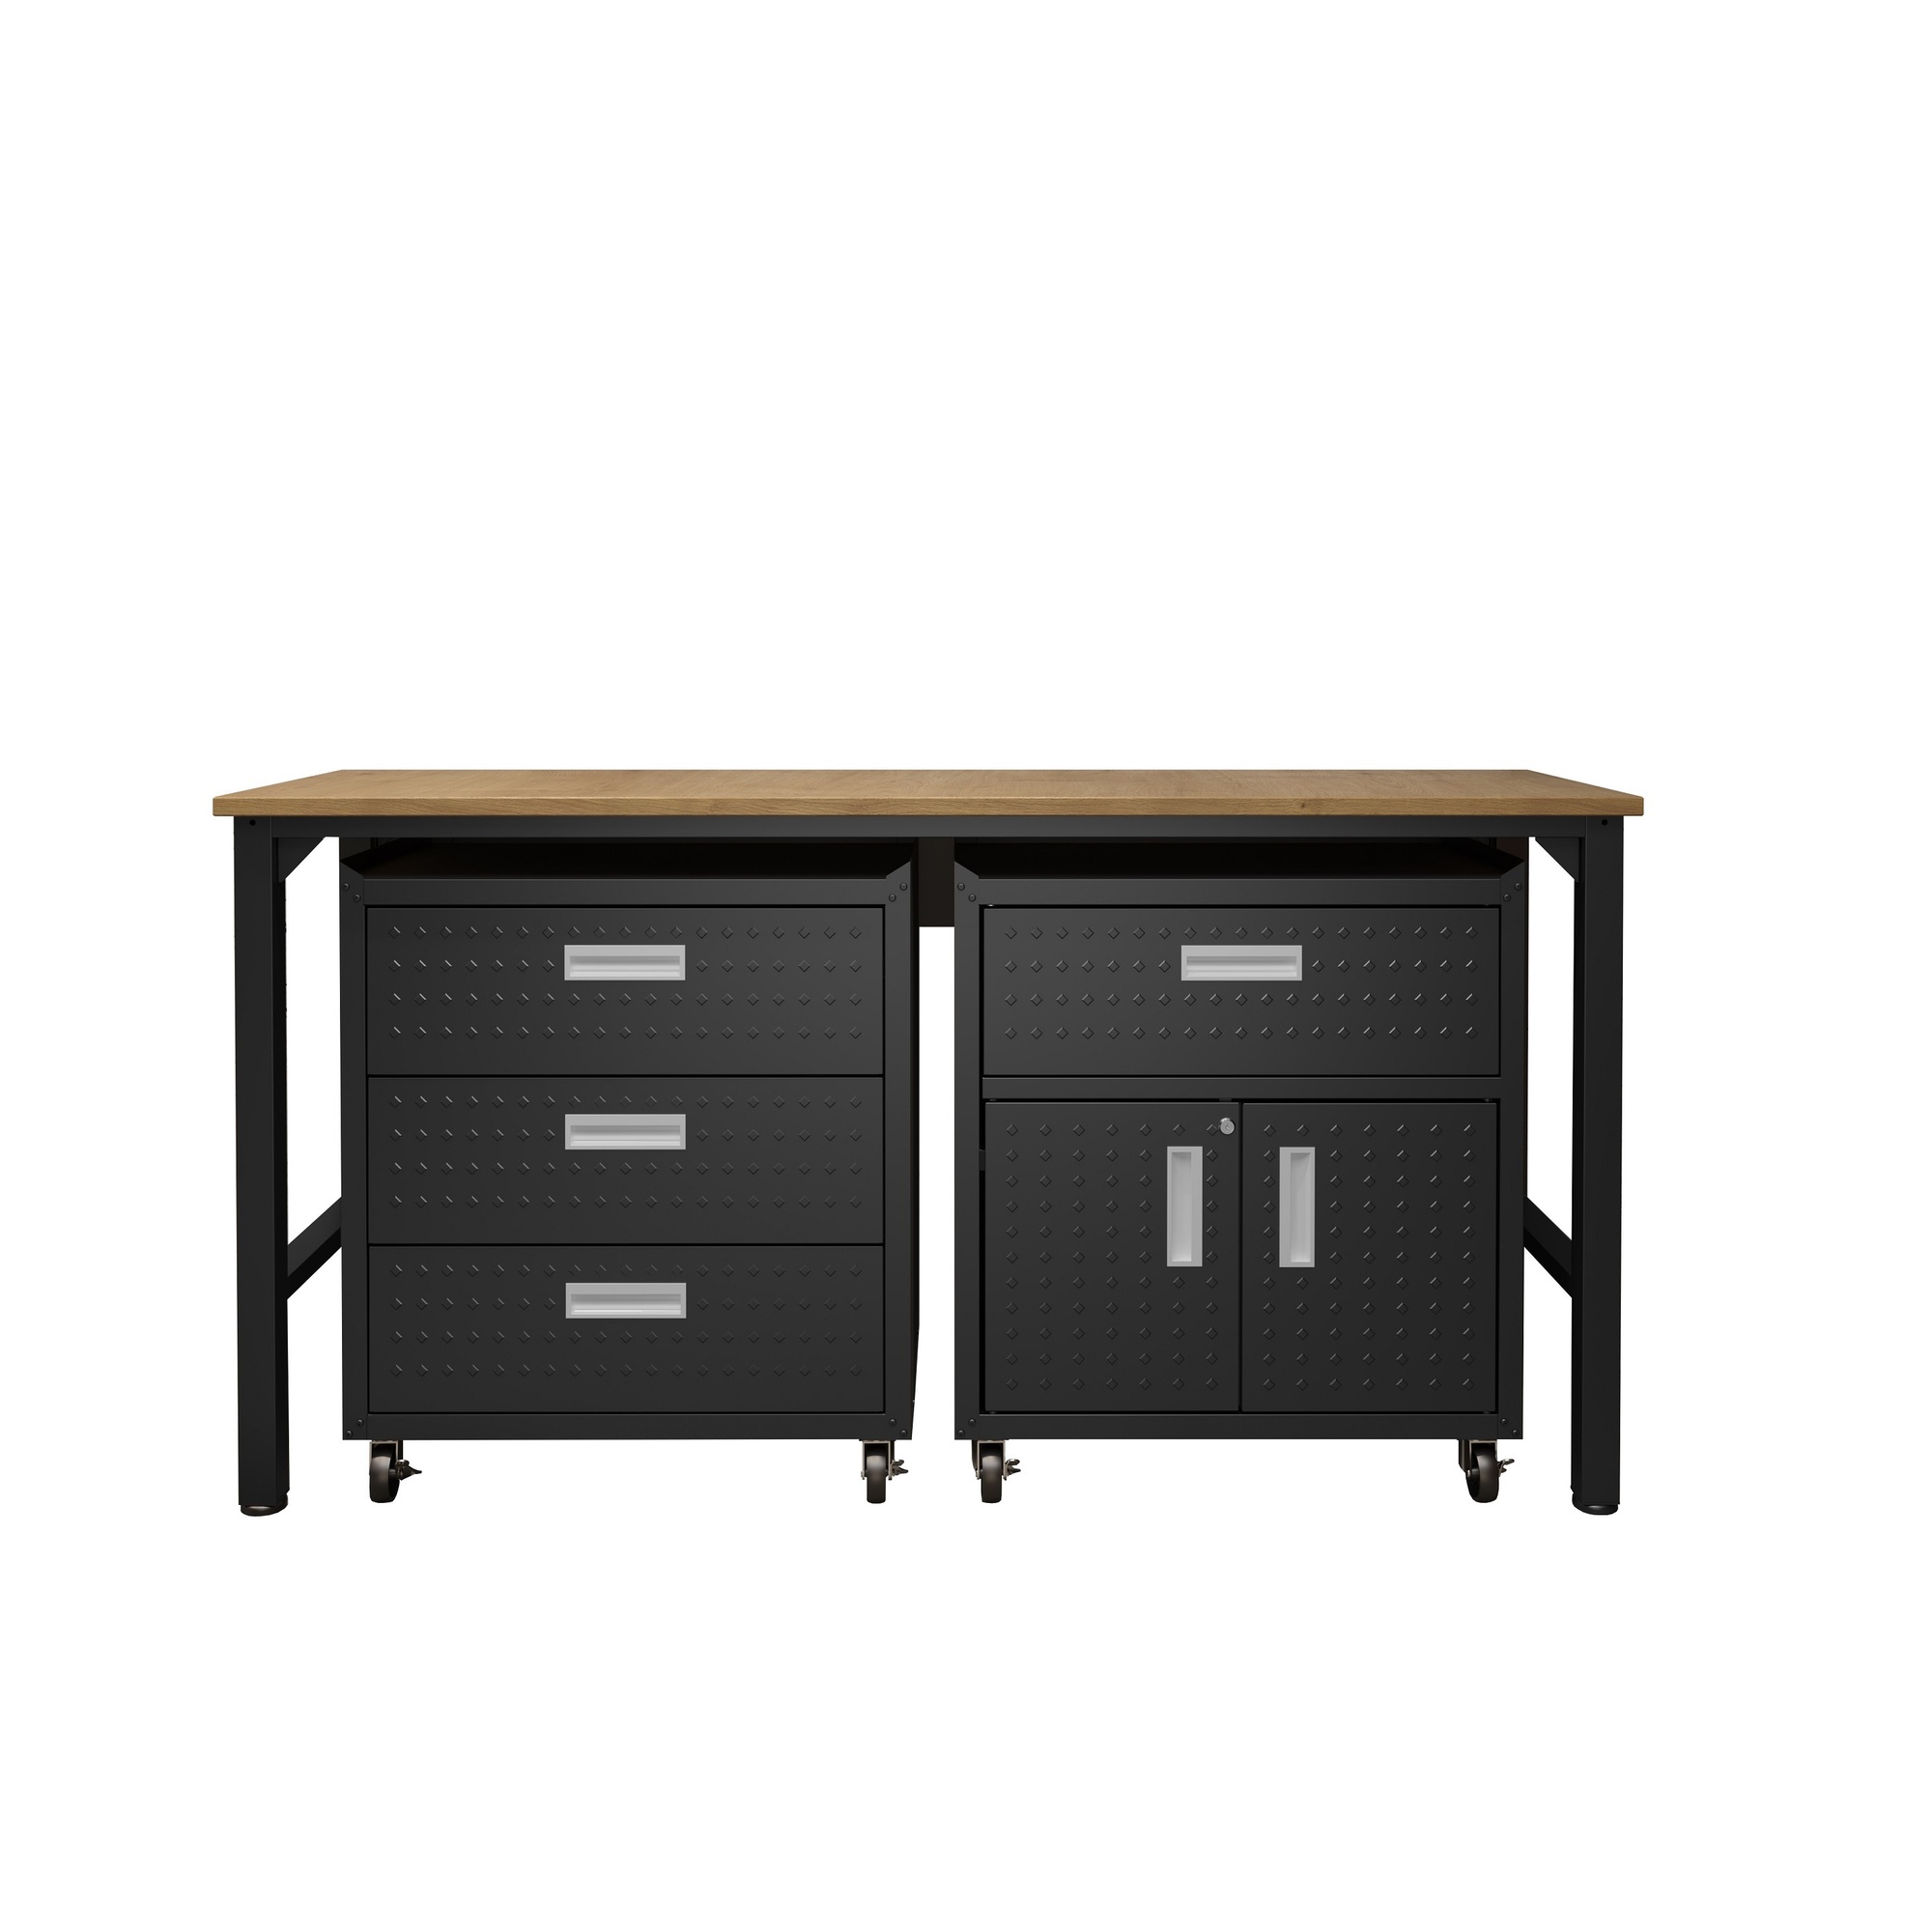 Manhattan Comfort, 3 Pc Fortress Mobile Garage Cabinet Set Charcoal, Width 72.4 in, Height 37.6 in, Depth 20.5 in, Model 18GMC